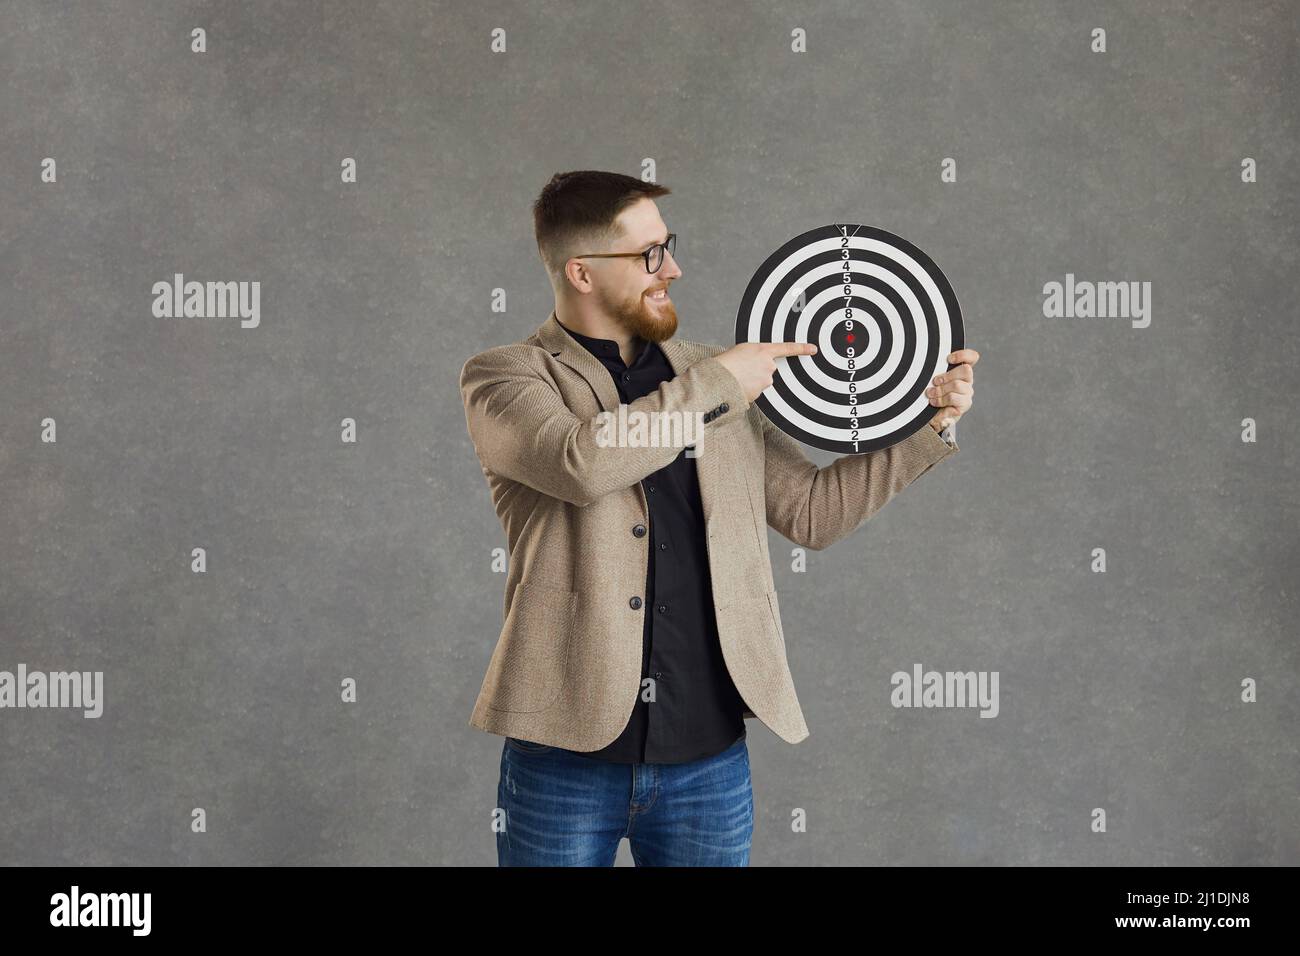 Happy young businessman holding a shooting target and pointing right at the bullseye Stock Photo